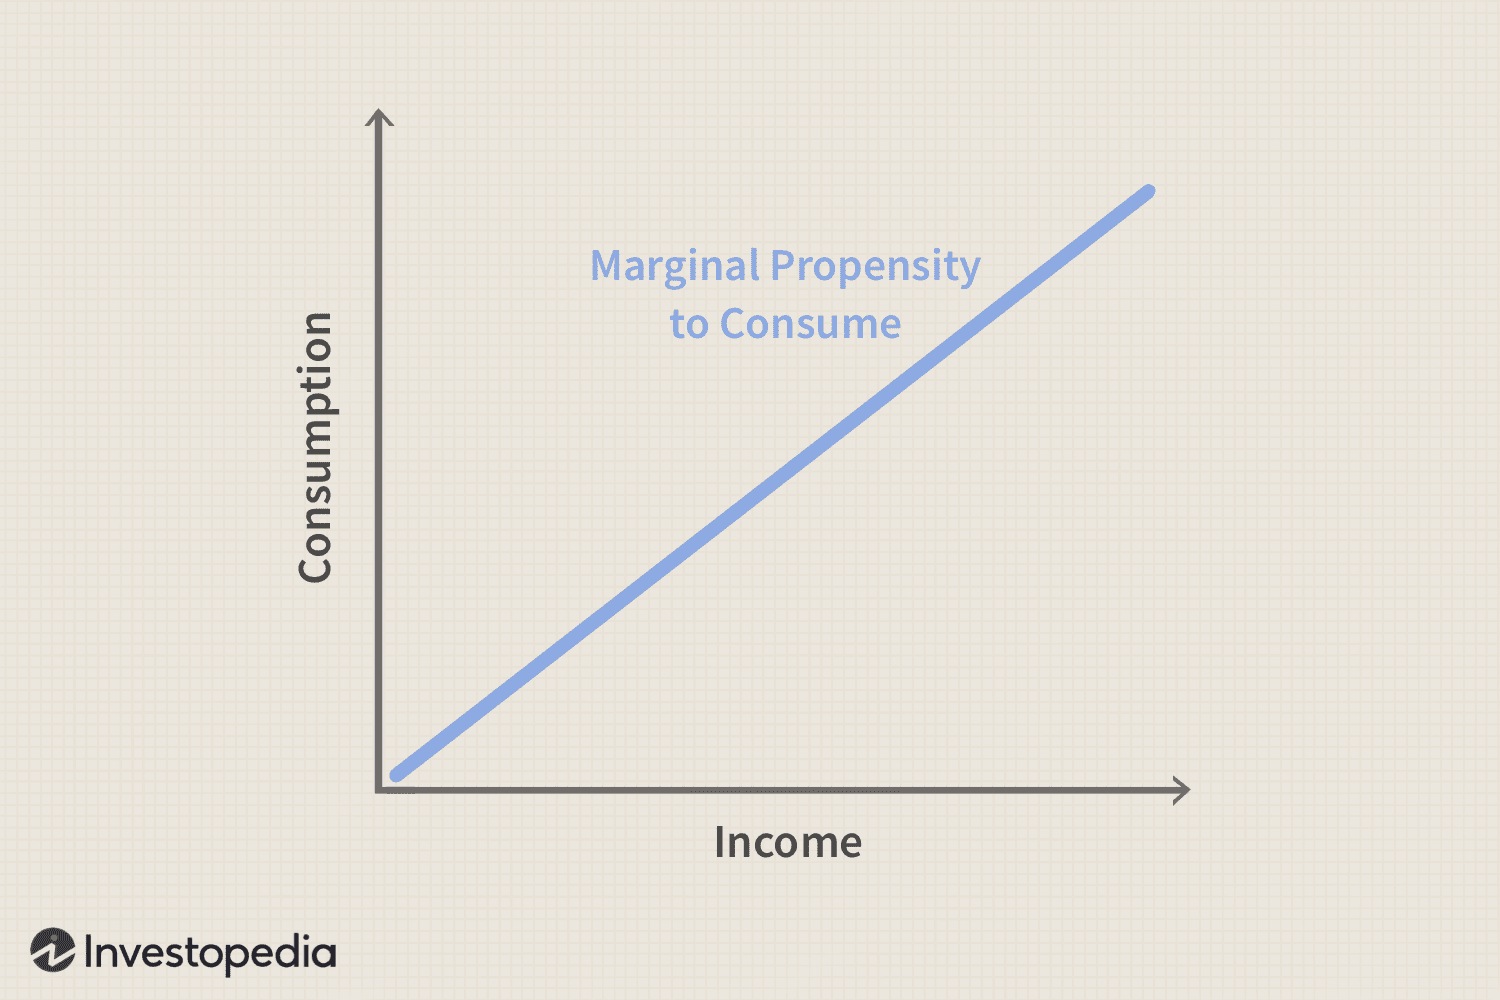 Marginal Propensity to Consume